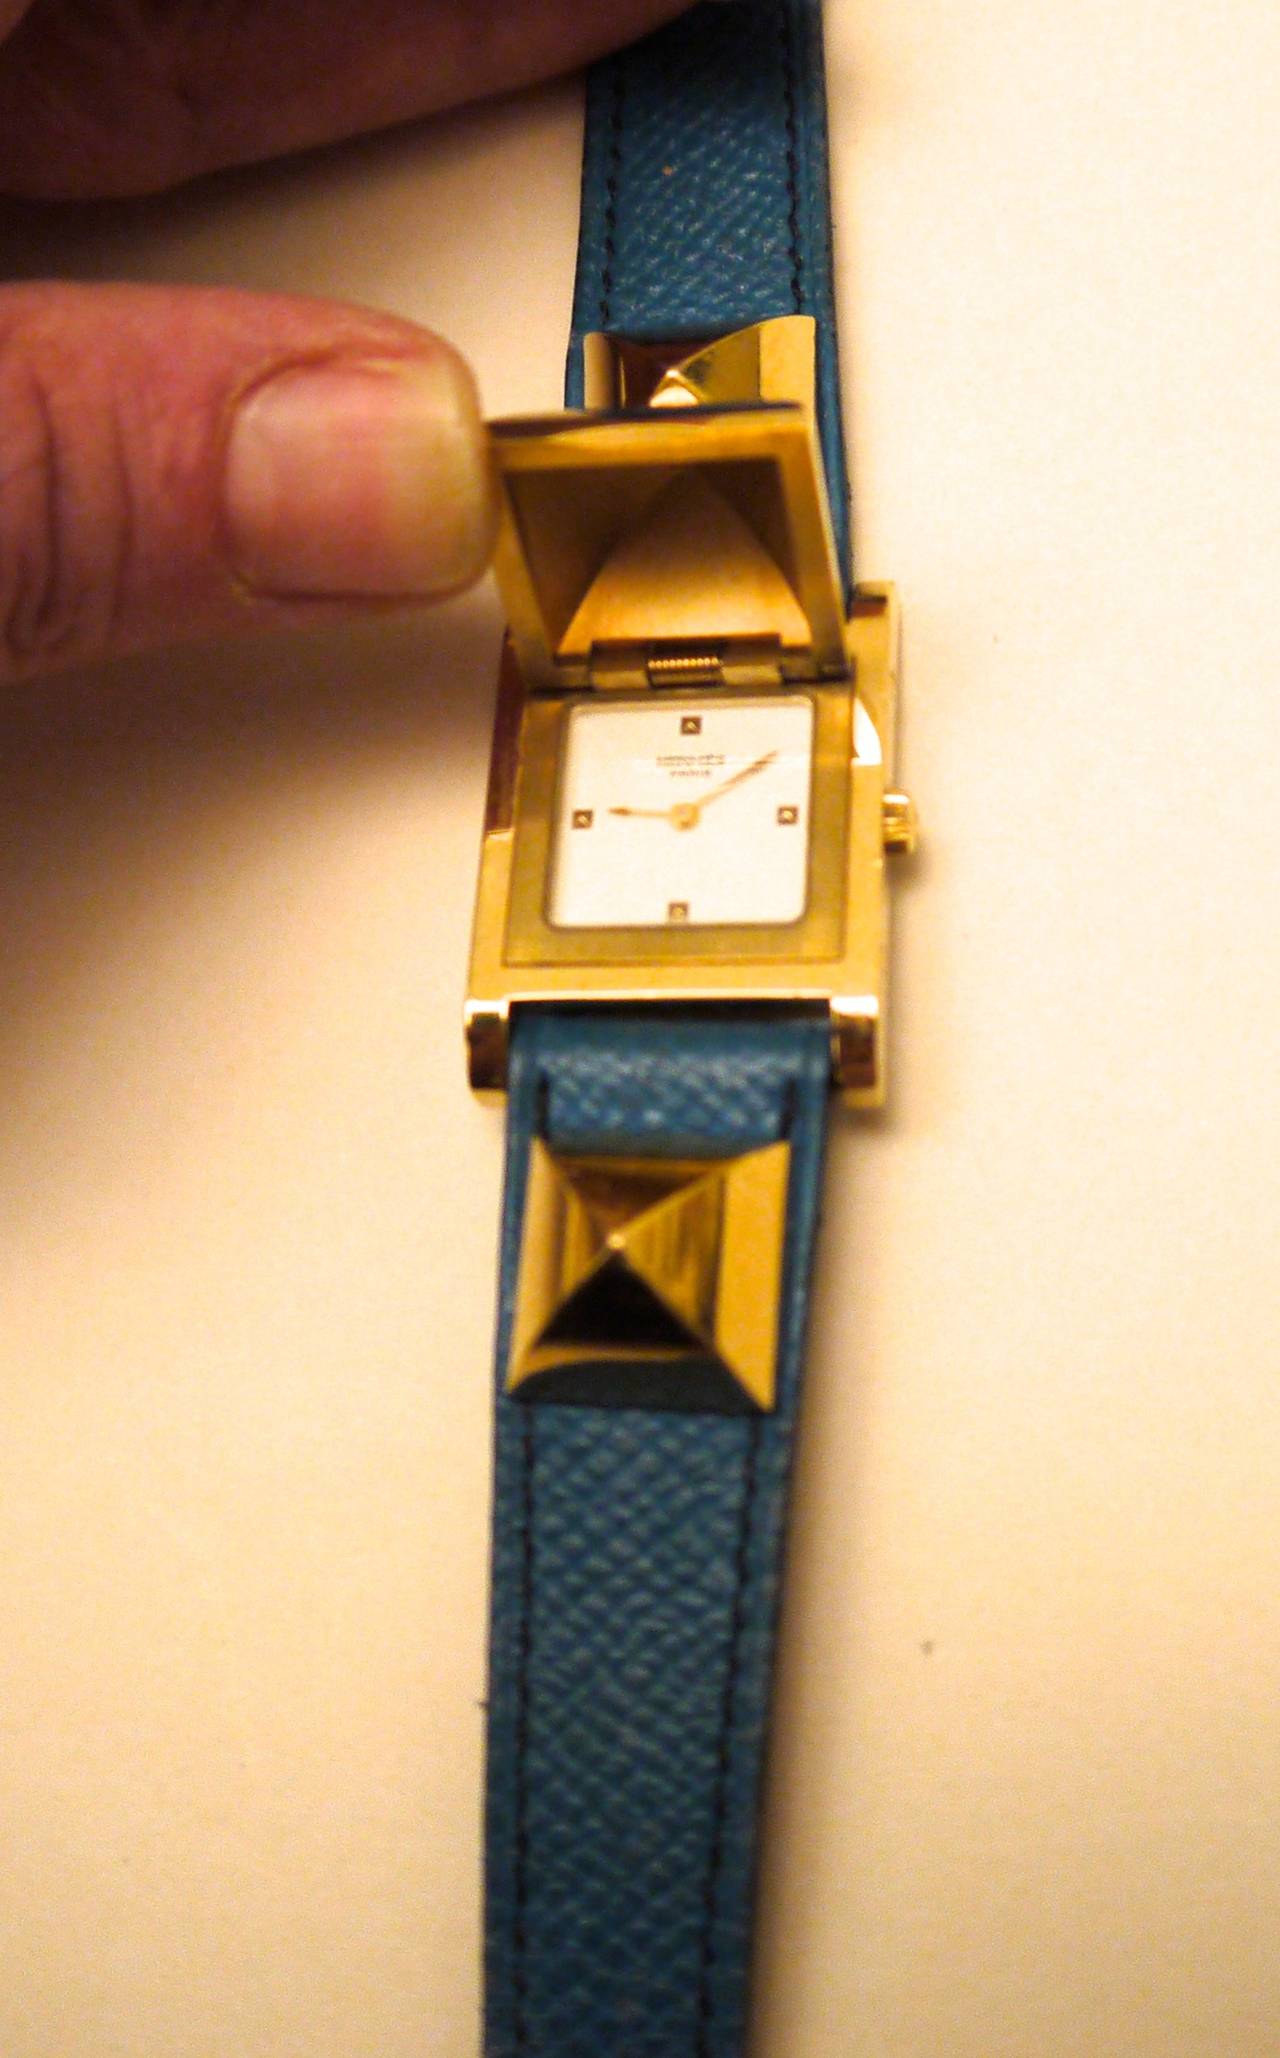 Vintage medor Hermes watch from the 1990's. The watch has a blue strap with gold tone hardware. The center gold square medor stud lifts up to reveal the watch face. The watch is a fantastic complement to any personal watch or Hermes collection.